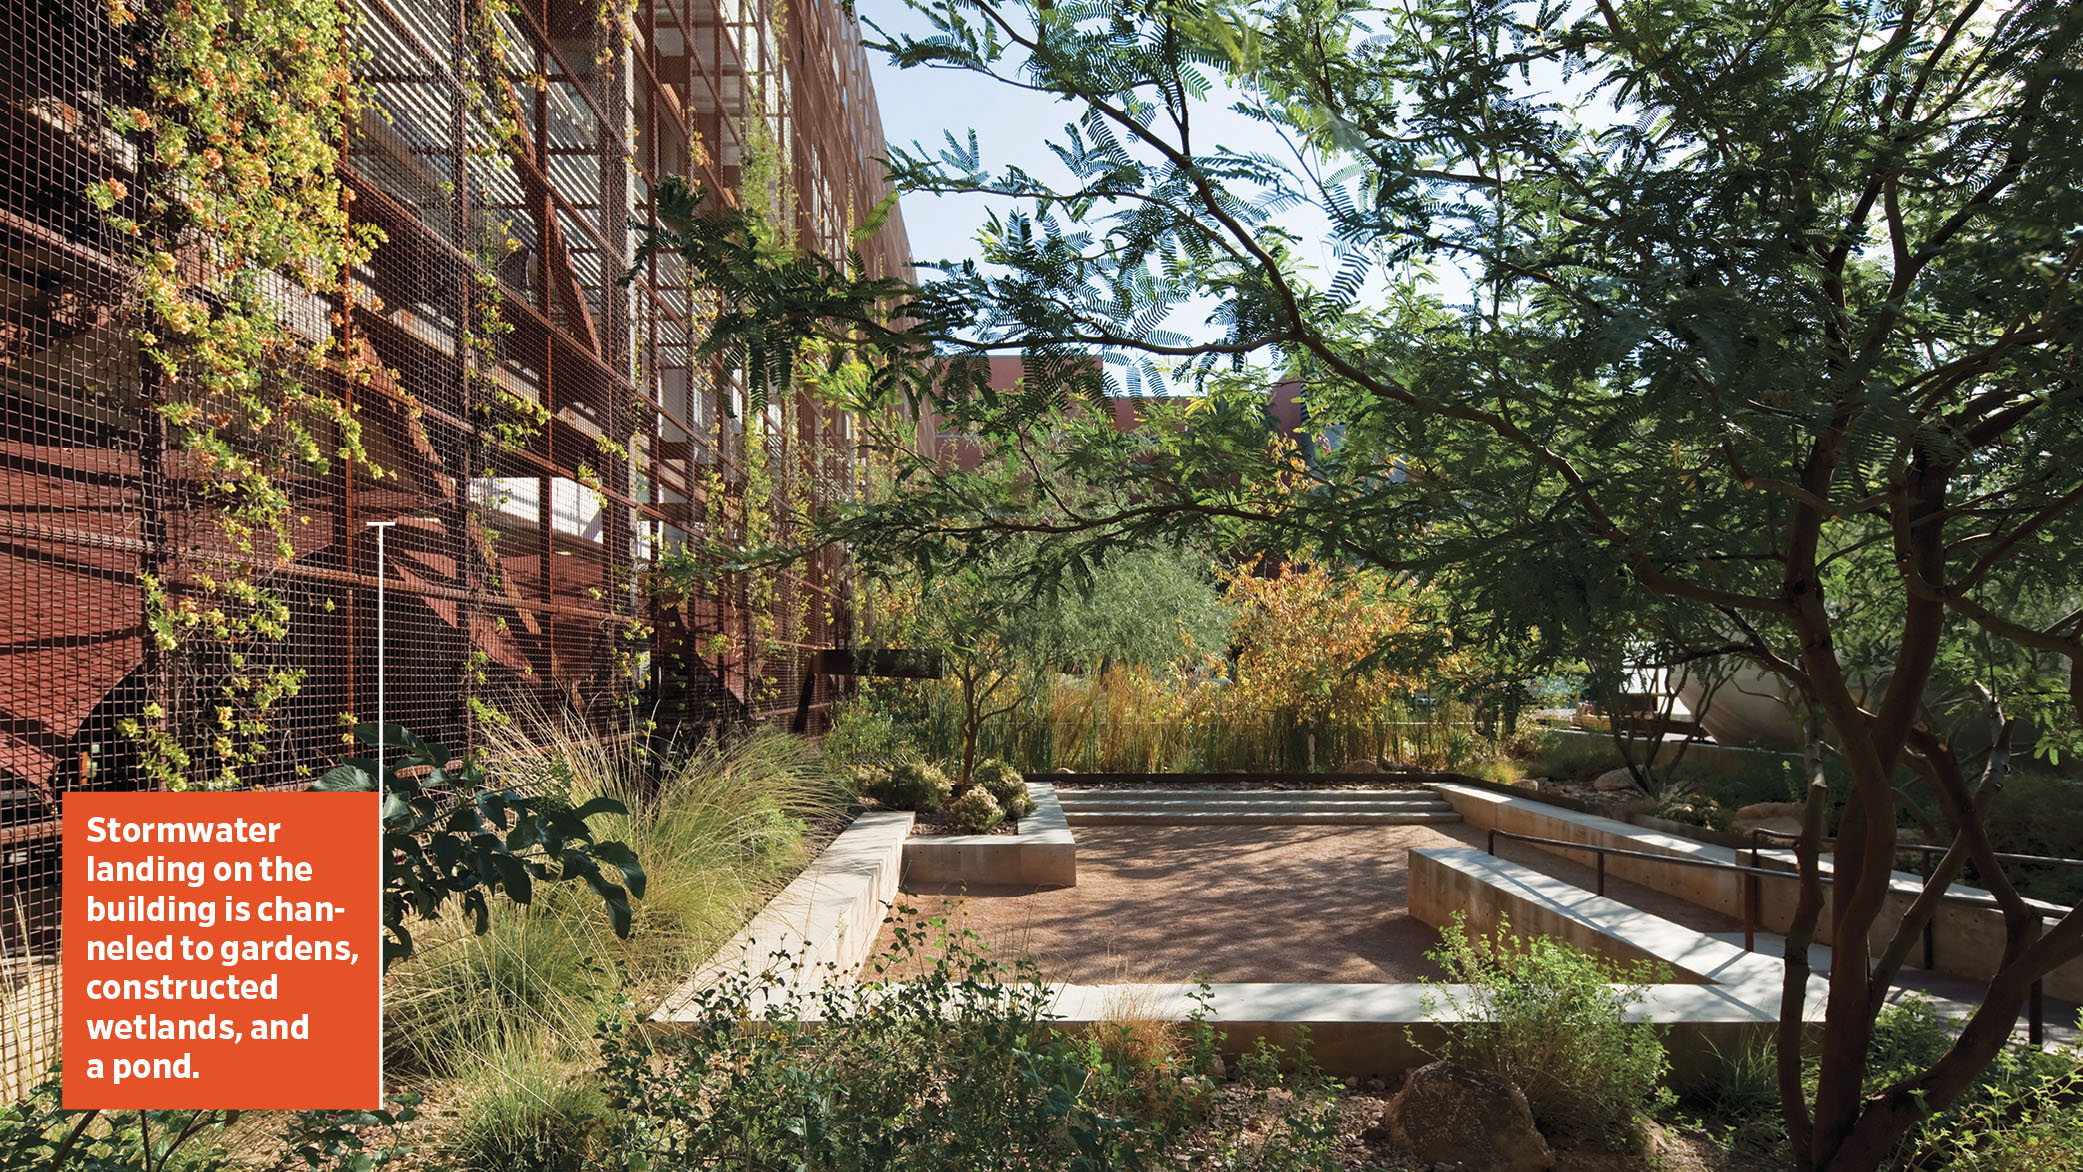 Nestled between water harvesting desert arroyos and beneath a mesquite bosque, a sunken court composed of permeable stabilized decomposed granite serves as both classroom and informal gathering space. The constructed wetland is shown in the background.